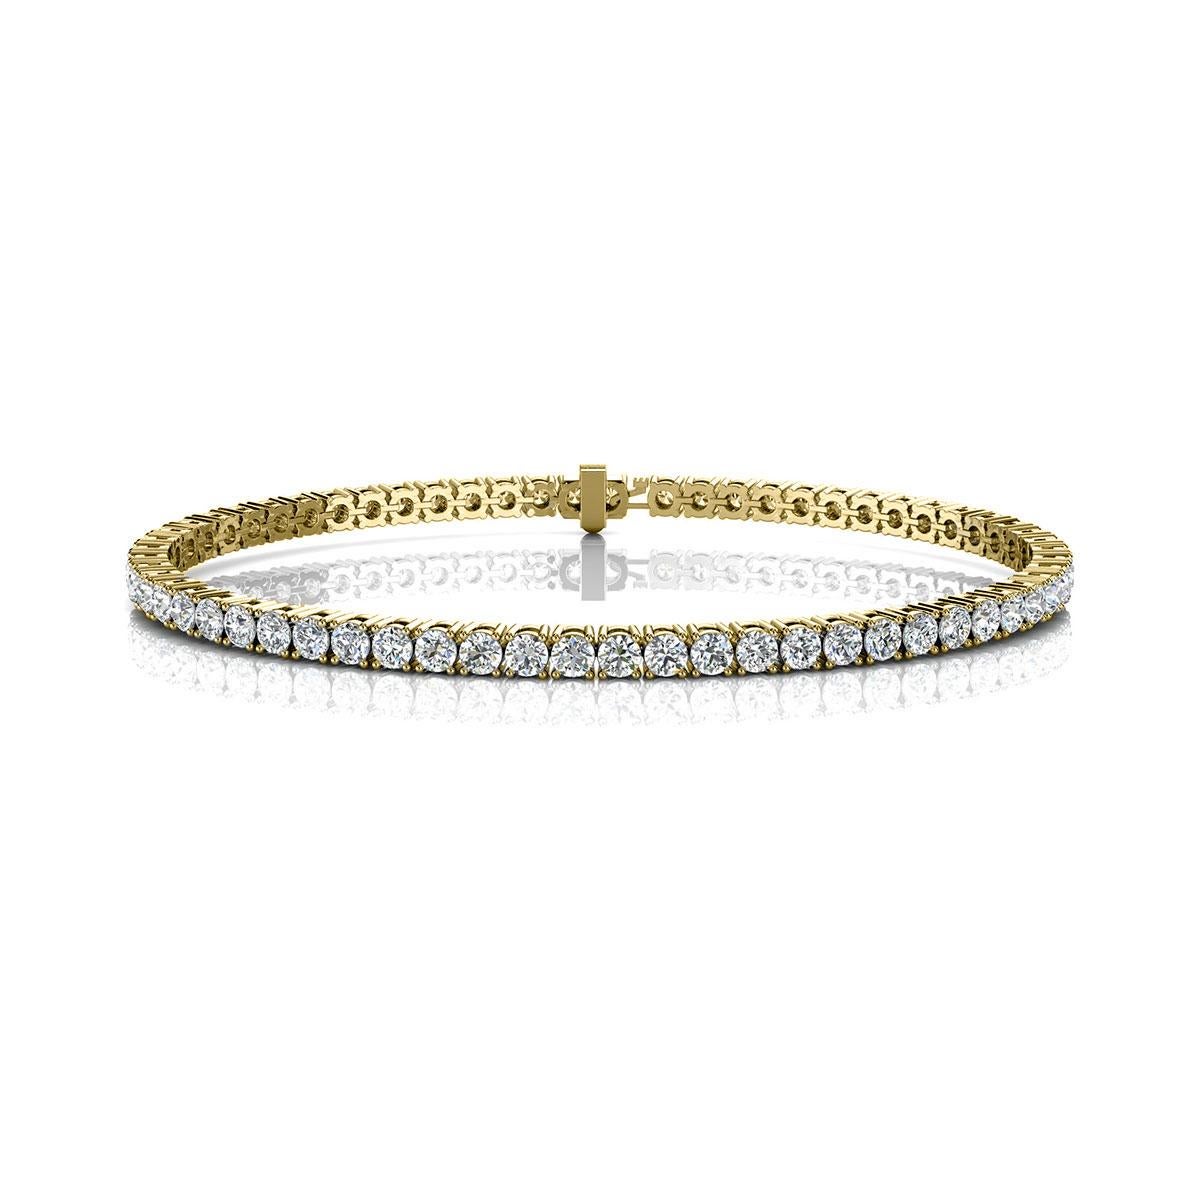 A timeless four prongs diamonds tennis bracelet. Experience the Difference!

Product details: 

Center Gemstone Type: NATURAL DIAMOND
Center Gemstone Color: WHITE
Center Gemstone Shape: ROUND
Center Diamond Carat Weight: 4
Metal: 14K Yellow